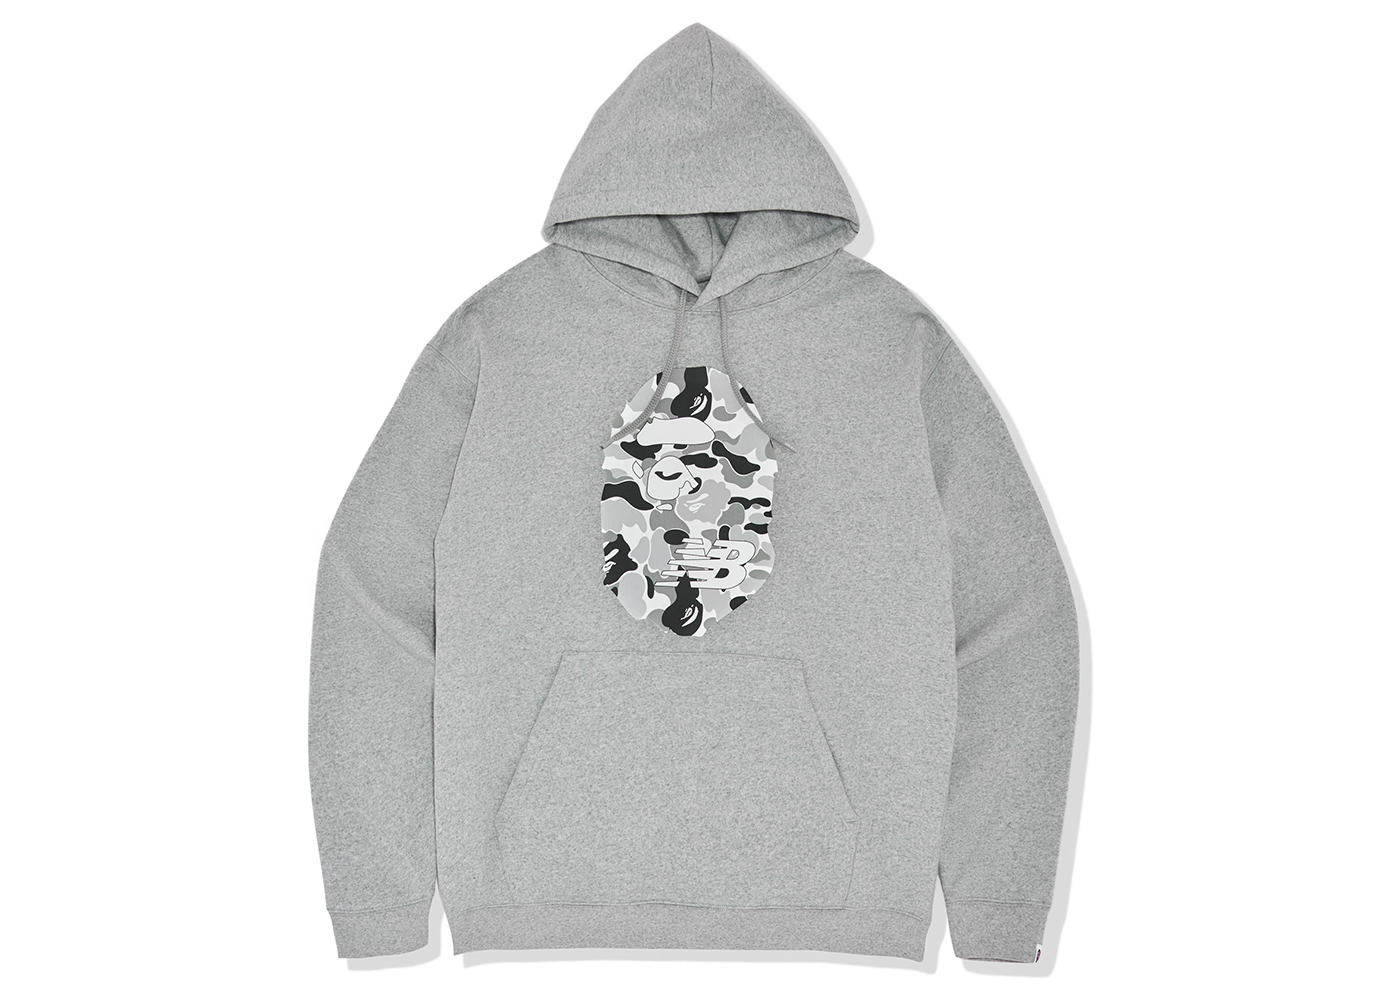 BAPE x New Balance Ape Head Relaxed Fit Pullover Hoodie Grey Men's